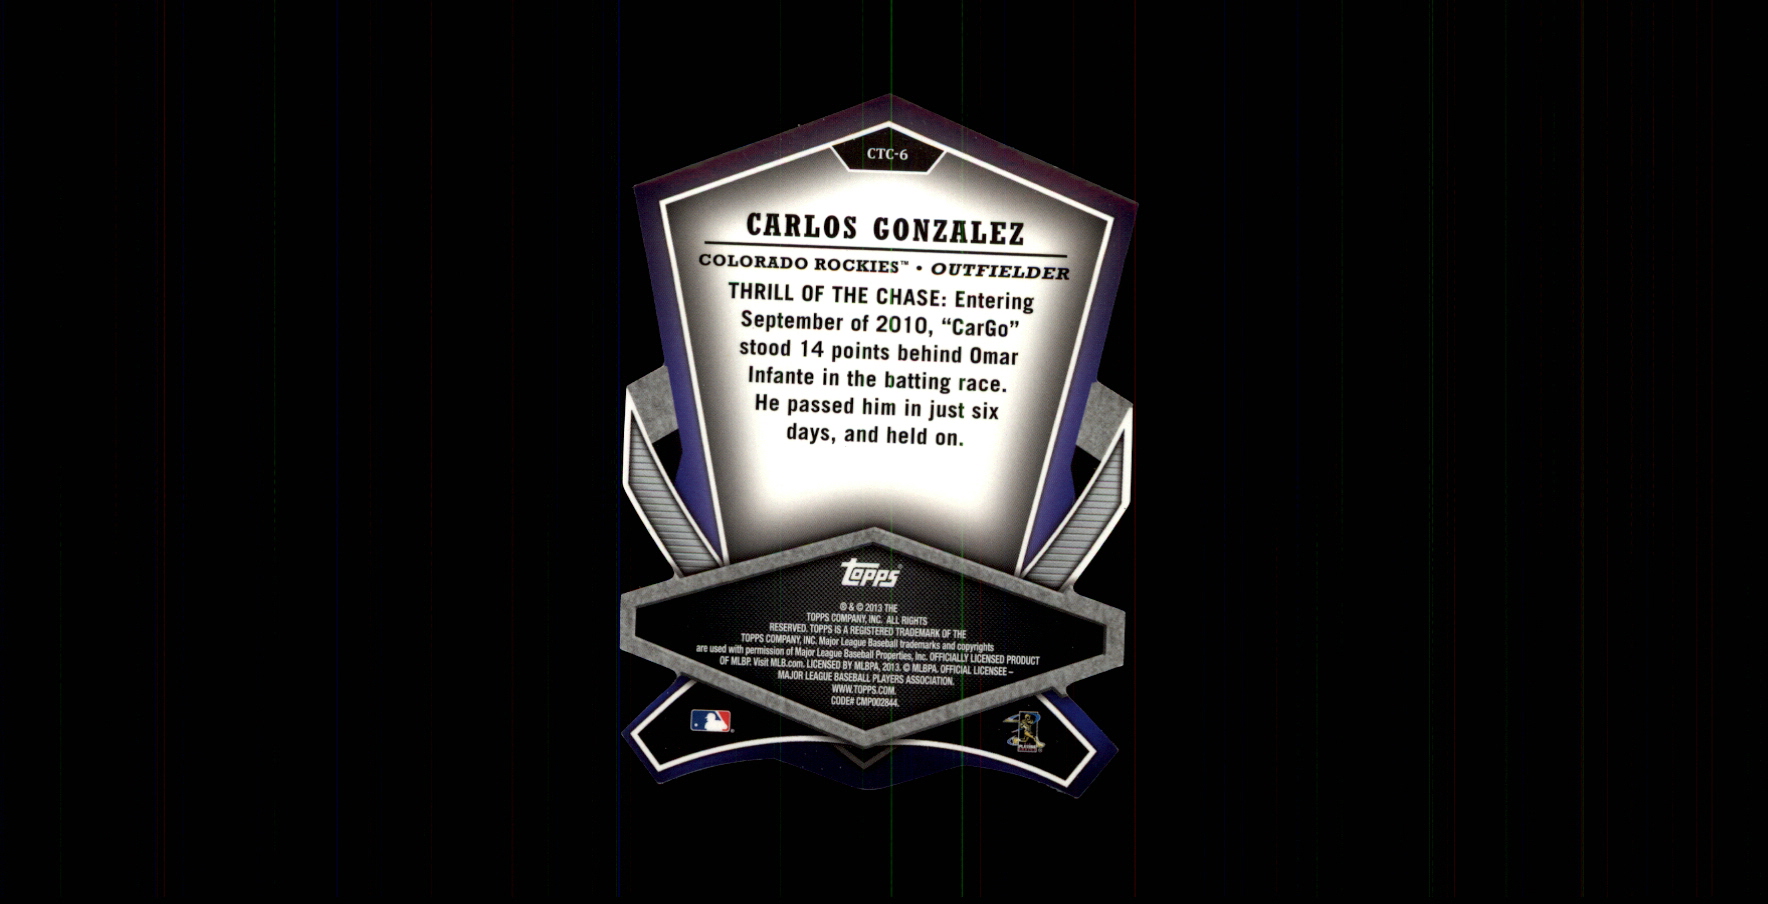 2013 Topps Cut To The Chase #CTC6 Carlos Gonzalez back image